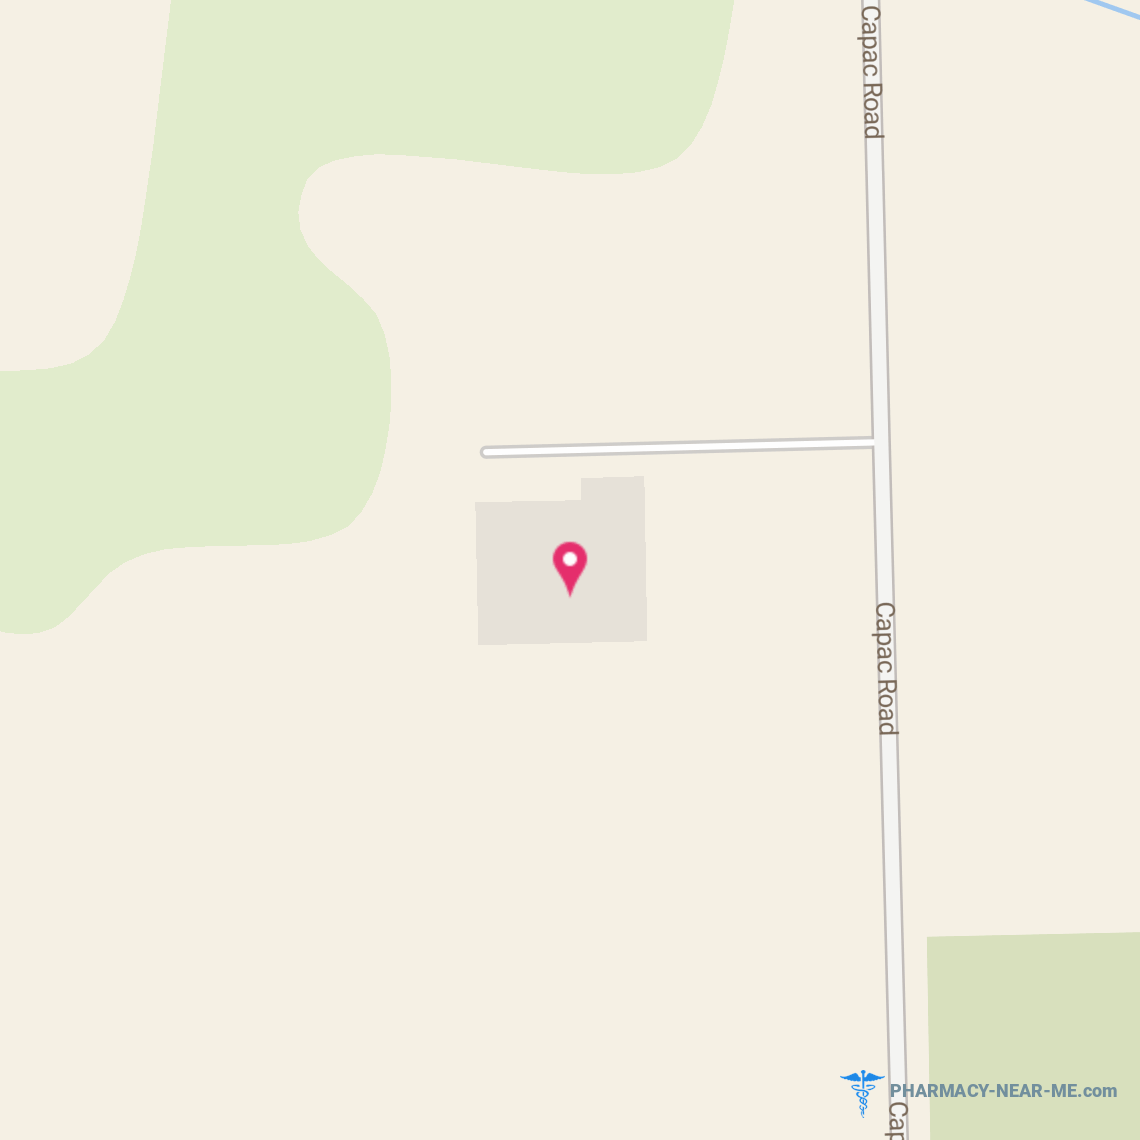 EHARDT'S PHARMACY INCORPORATED - Pharmacy Hours, Phone, Reviews & Information: 3433 Capac Road, Mussey, Michigan 48014, United States